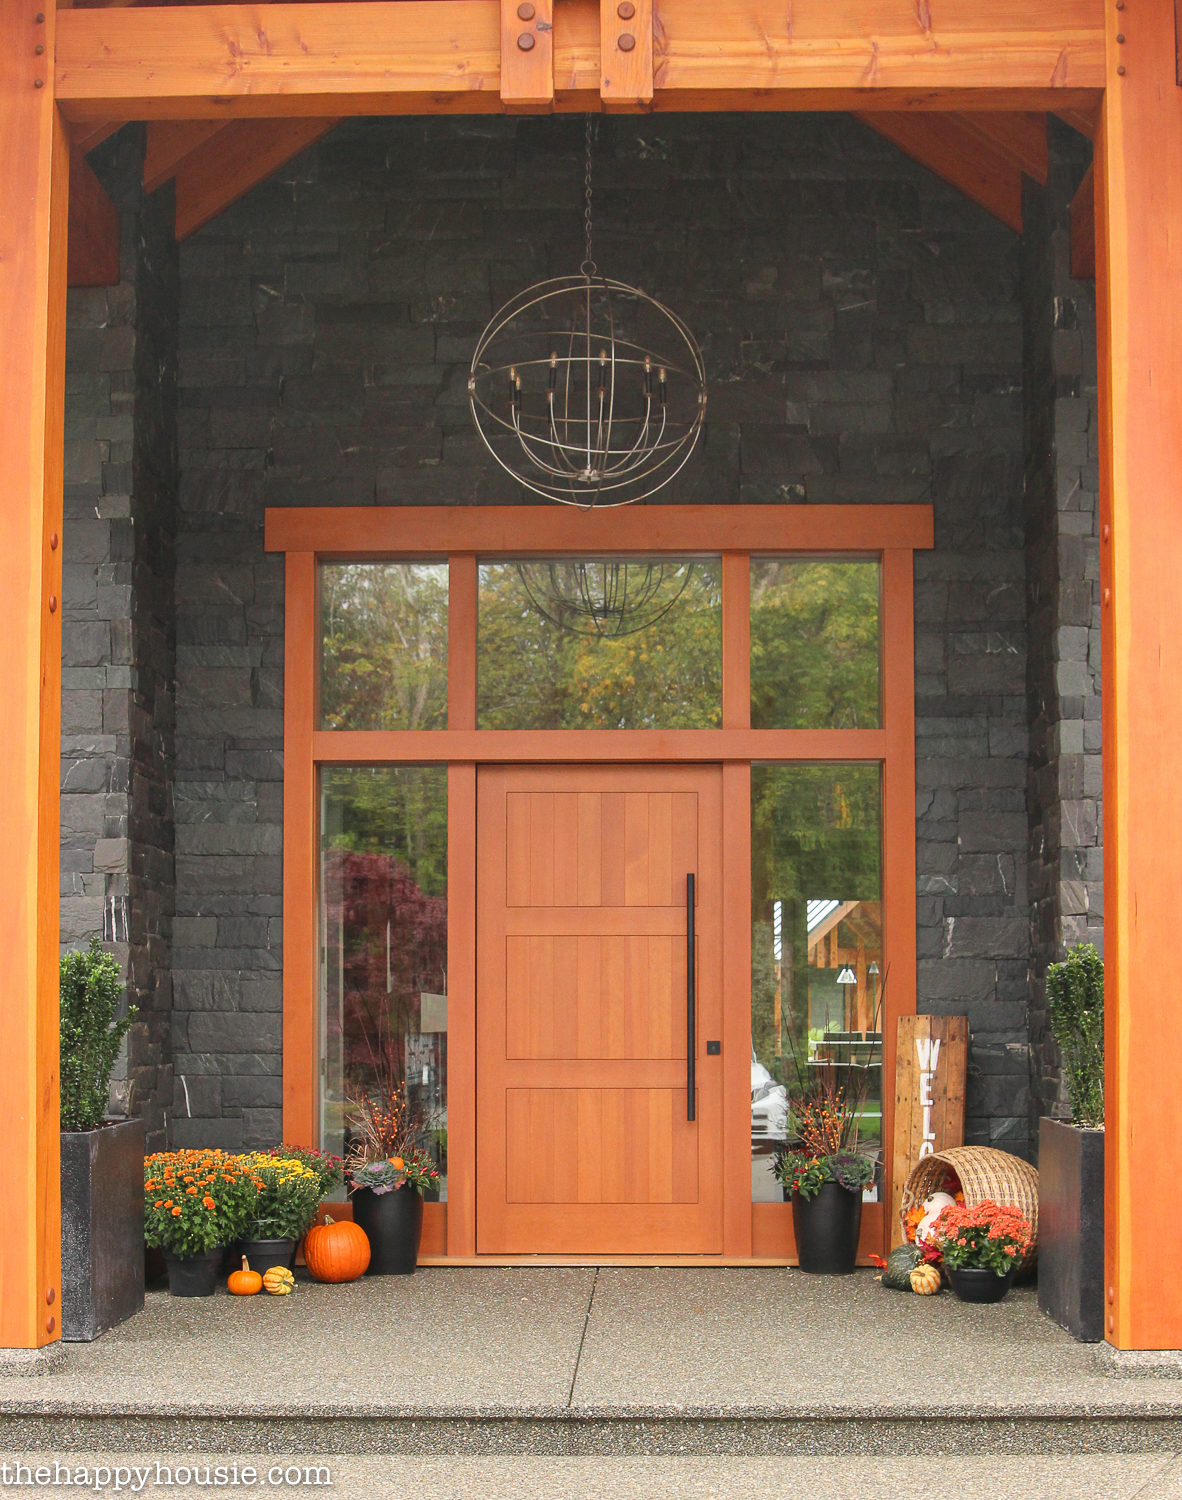 A wooden frame and door surrounding brick with the porch decorated for fall.